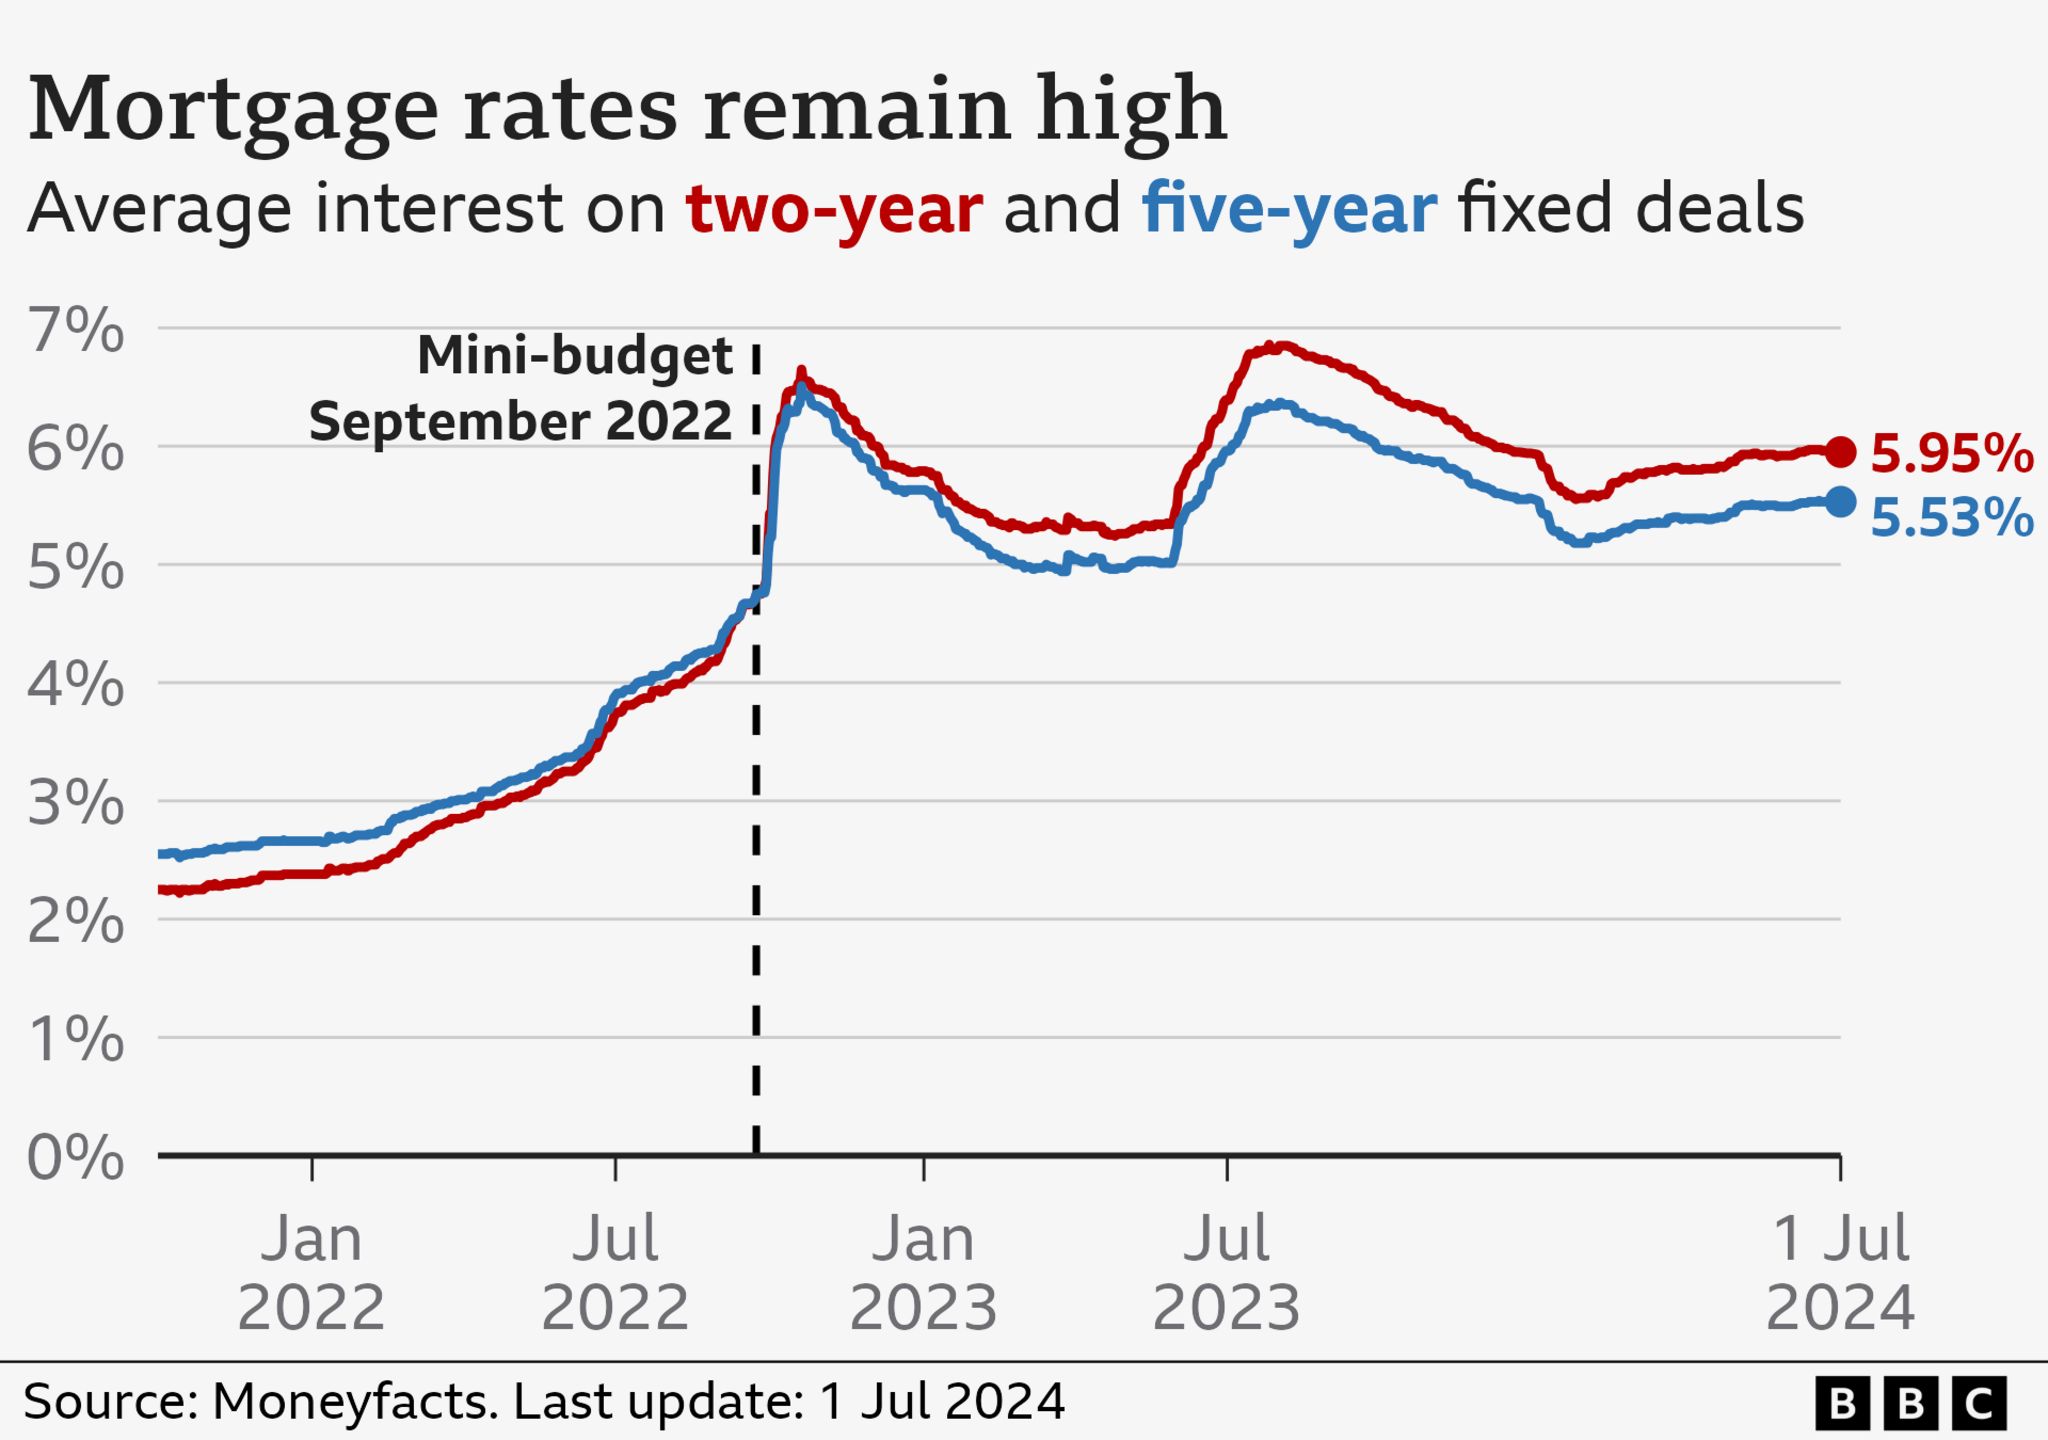 Line chart showing in red the average interest on a two-year fixed mortgage at 5.95% as of 1 July, and in blue the average rate on a five-year fixed mortgage at 5.53%